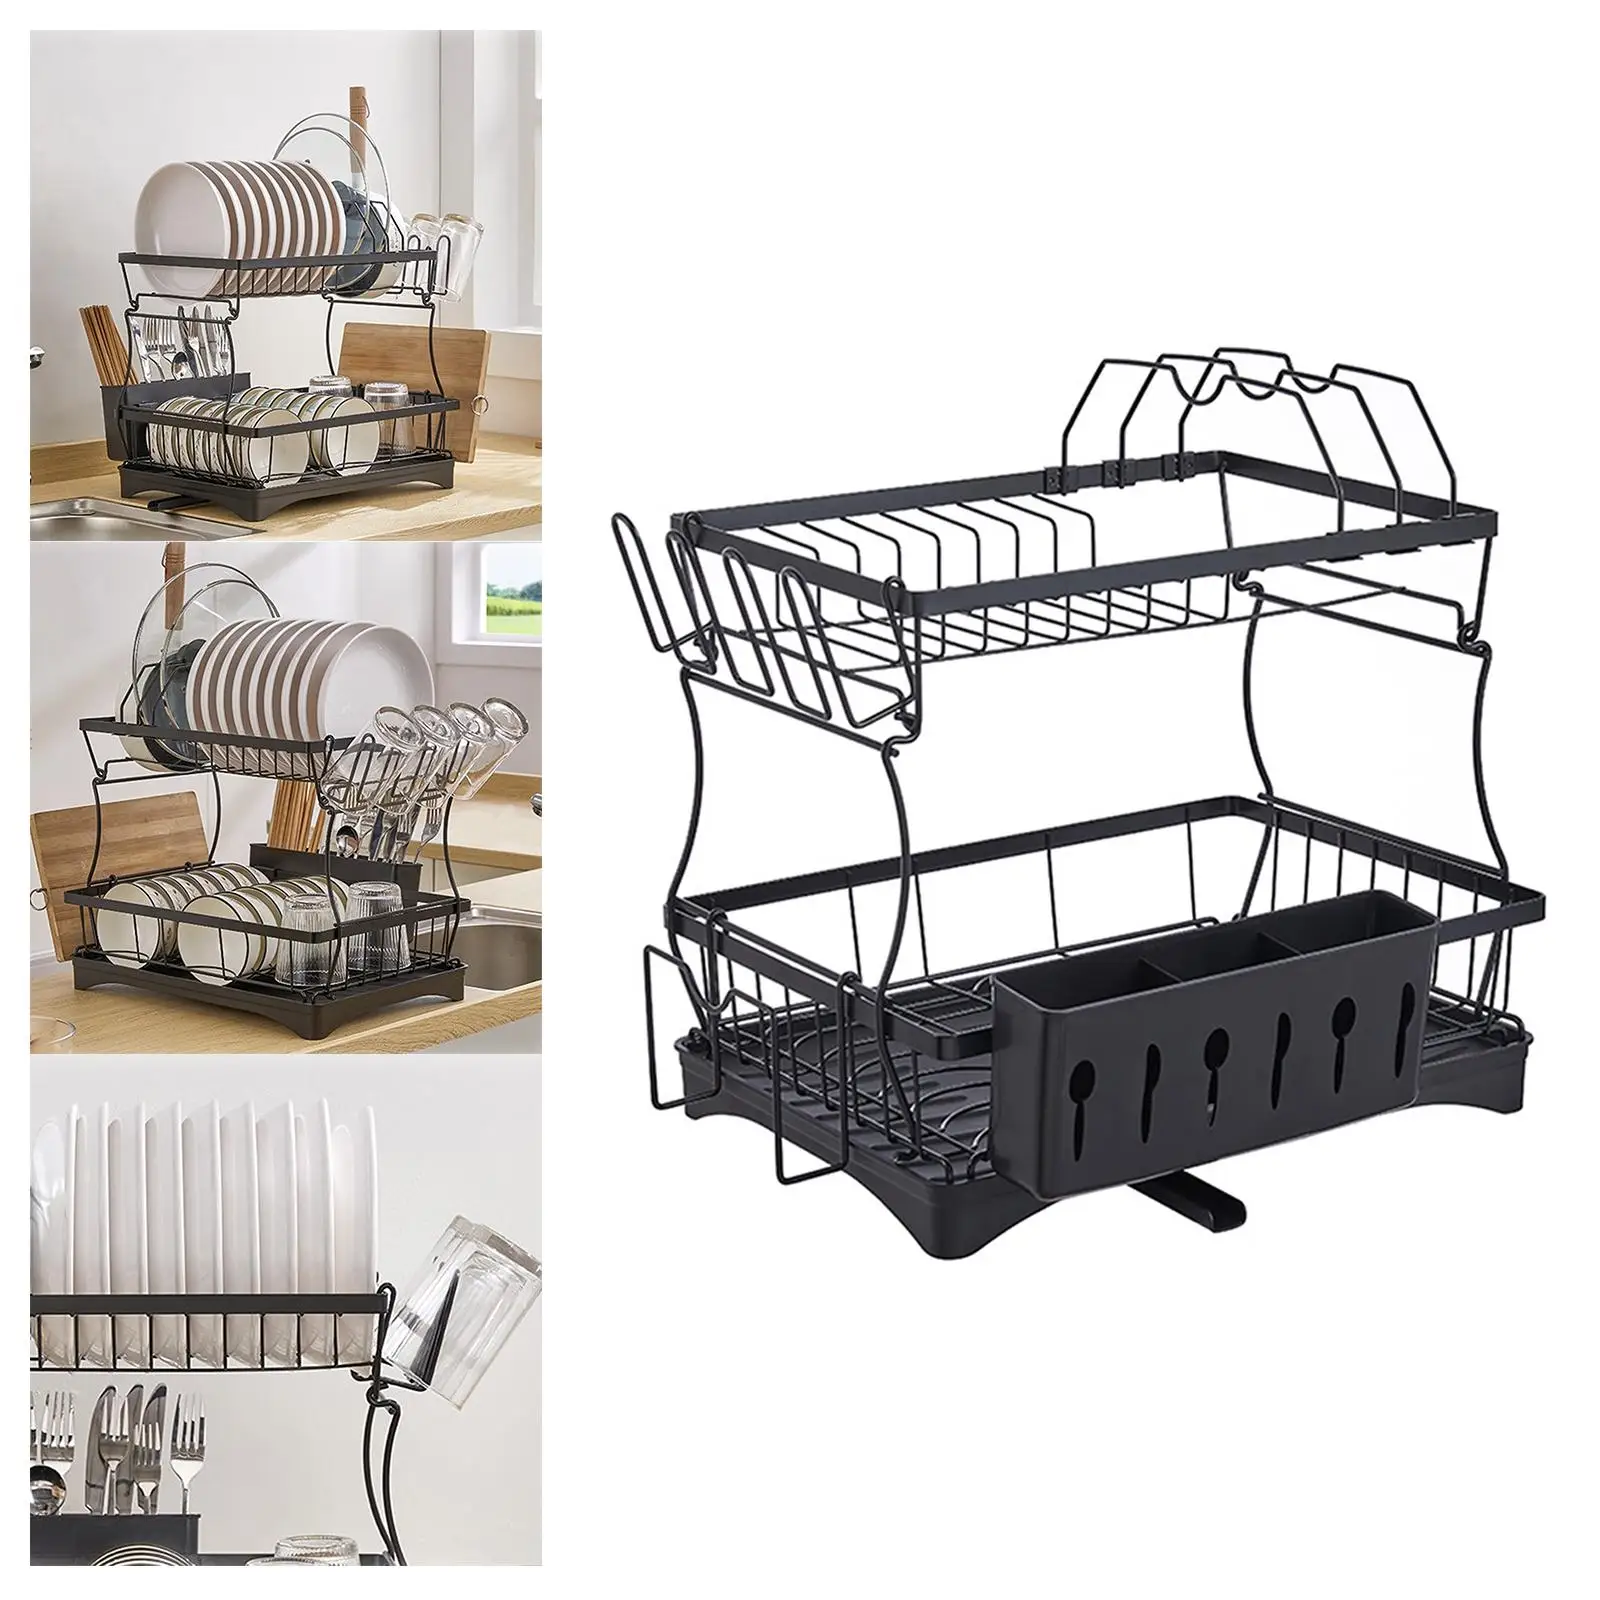 2 Tiers Dish Drying Rack with Drainboard Utensils Holder for Restaurant Countertop